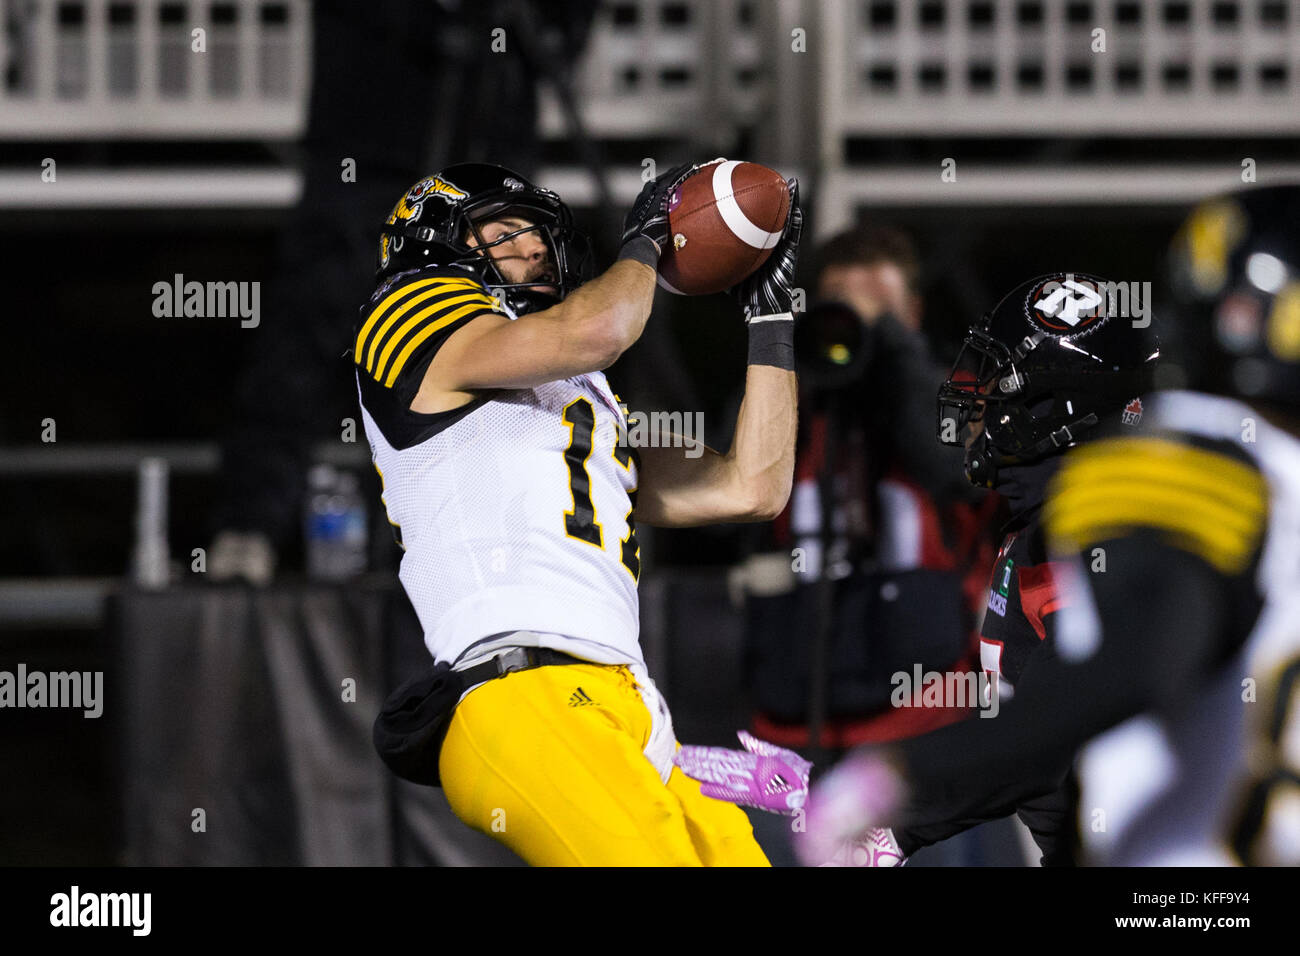 Ottawa, Canada. 27th Oct, 2017. Hamilton Tiger-Cats wide receiver Luke  Tasker (17) makes a fourth quarter touchdown reception during the CFL game  between Hamilton Tiger-Cats and Ottawa Redblacks at TD Place Stadium